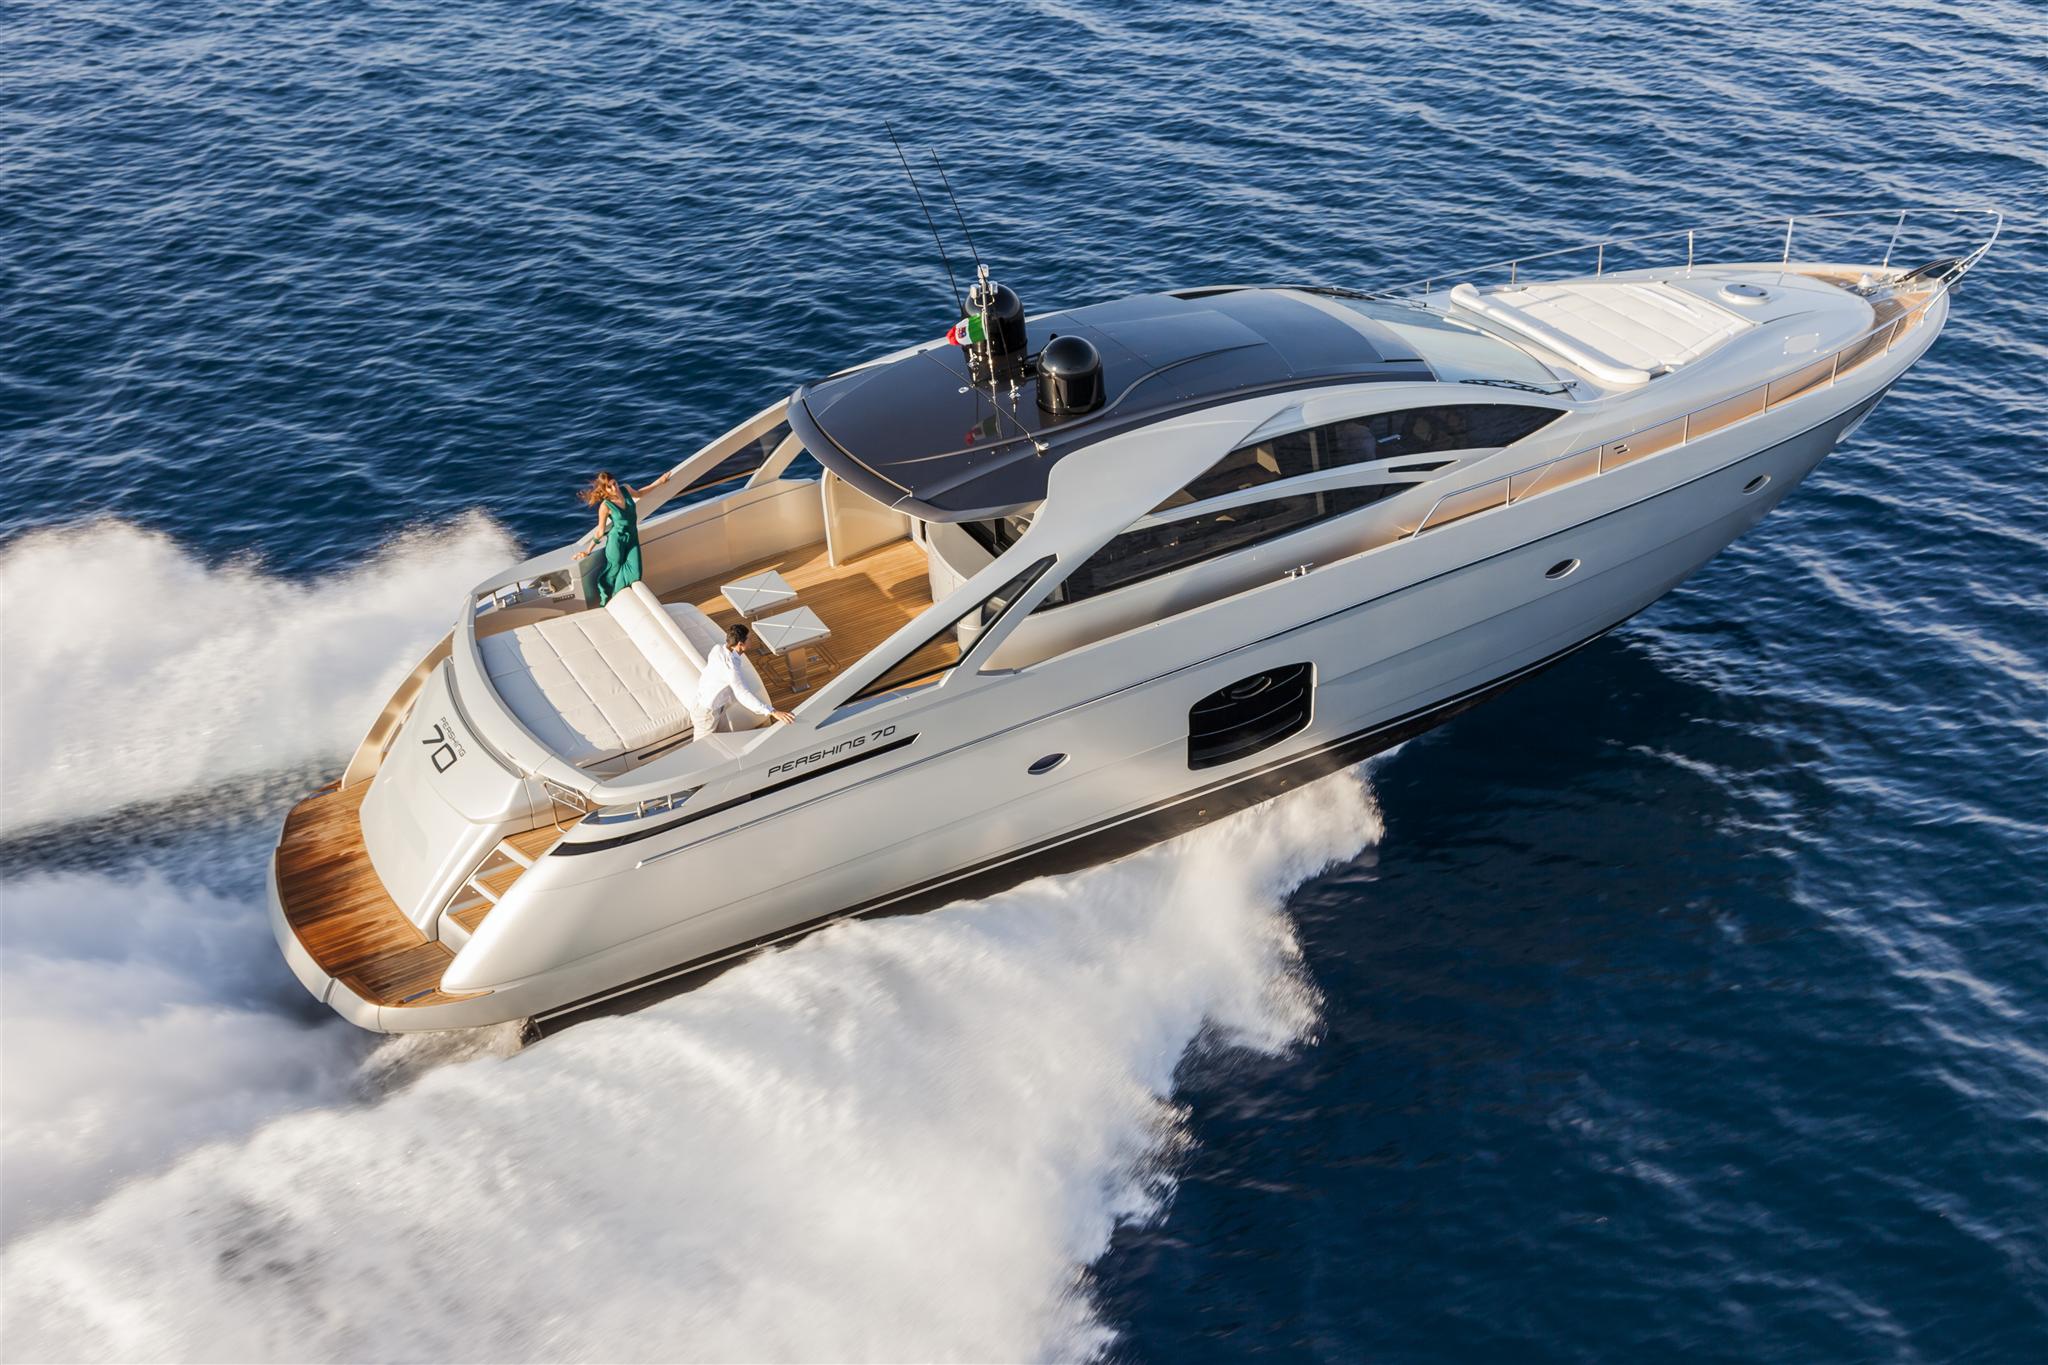 Pershing 70 Speed & Performance of 46 Knots